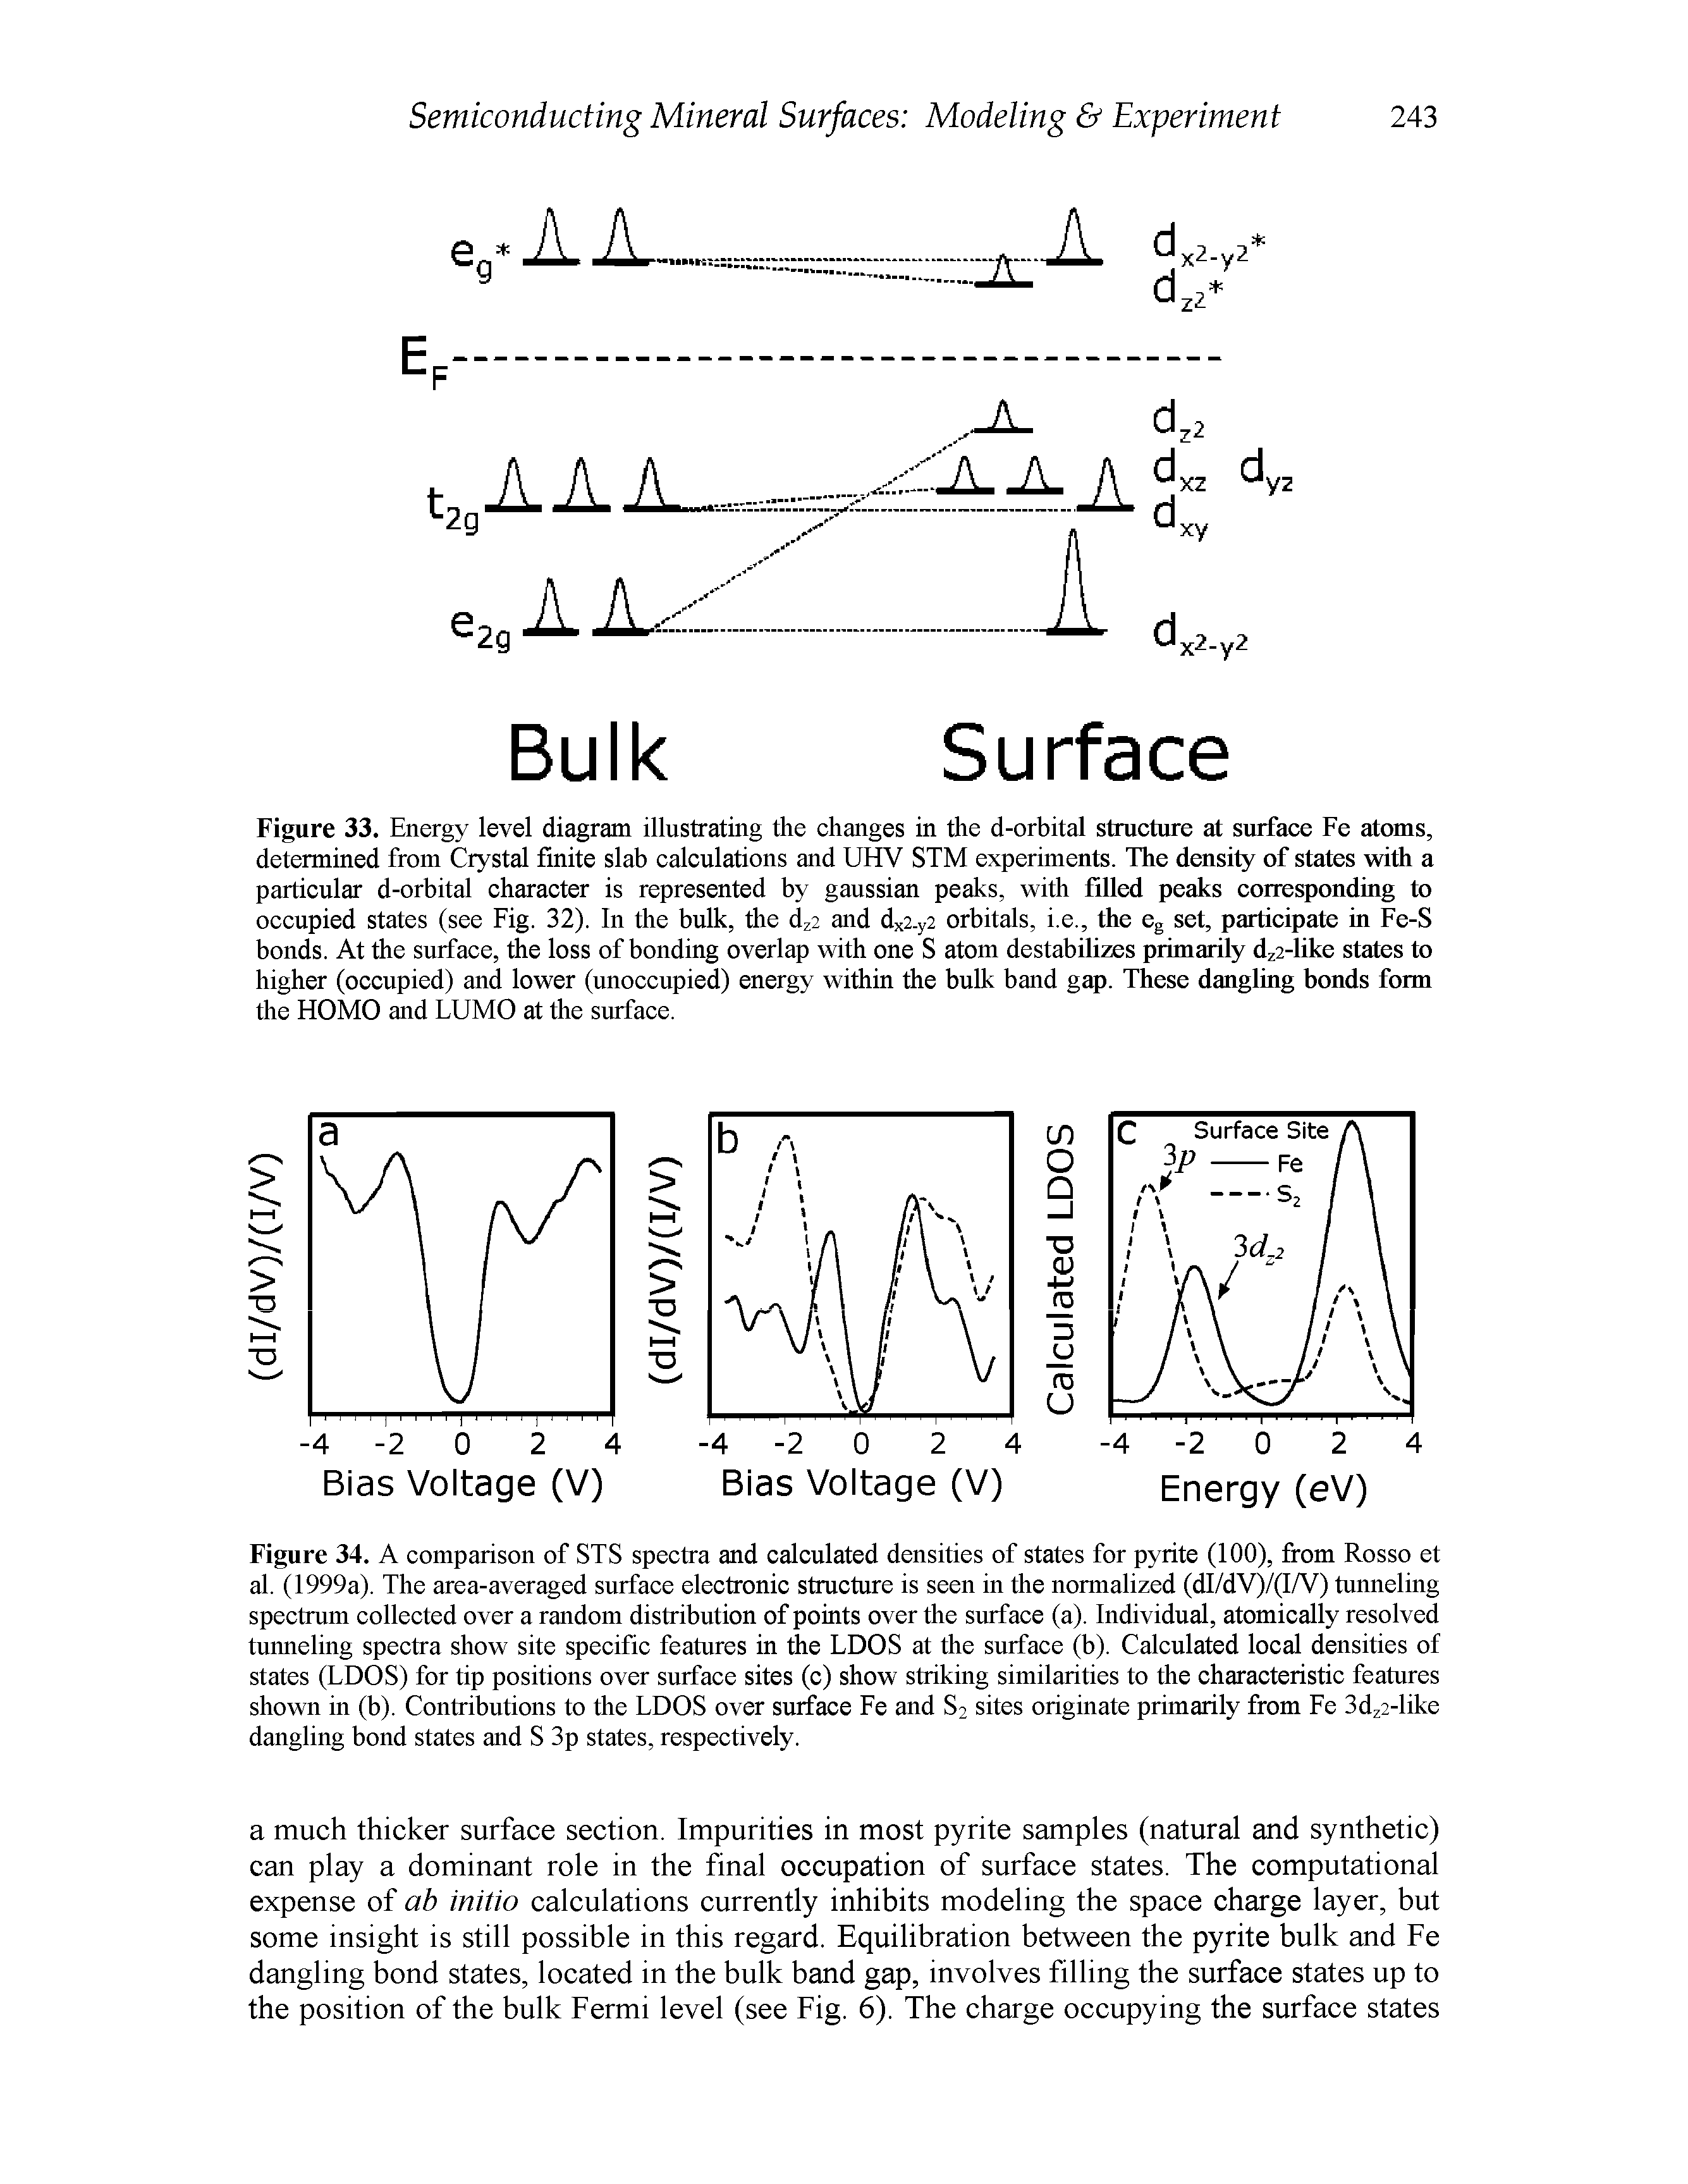 Figure 34. A comparison of STS spectra and calculated densities of states for pyrite (100), fi om Rosso et al. (1999a). The area-averaged surface electronic structure is seen in the normalized (dI/dV)/(IA ) tunneling spectrum collected over a random distribution of points over the surface (a). Individual, atomically resolved tunneling spectra show site specific features in the LDOS at the surface (b). Calculated local densities of states (LDOS) for tip positions over surface sites (c) show striking similarities to the characteristic features shown in (b). Contributions to the LDOS over siuface Fe and S2 sites originate primarily from Fe 3dz2-like dangling bond states and S 3p states, respectively.